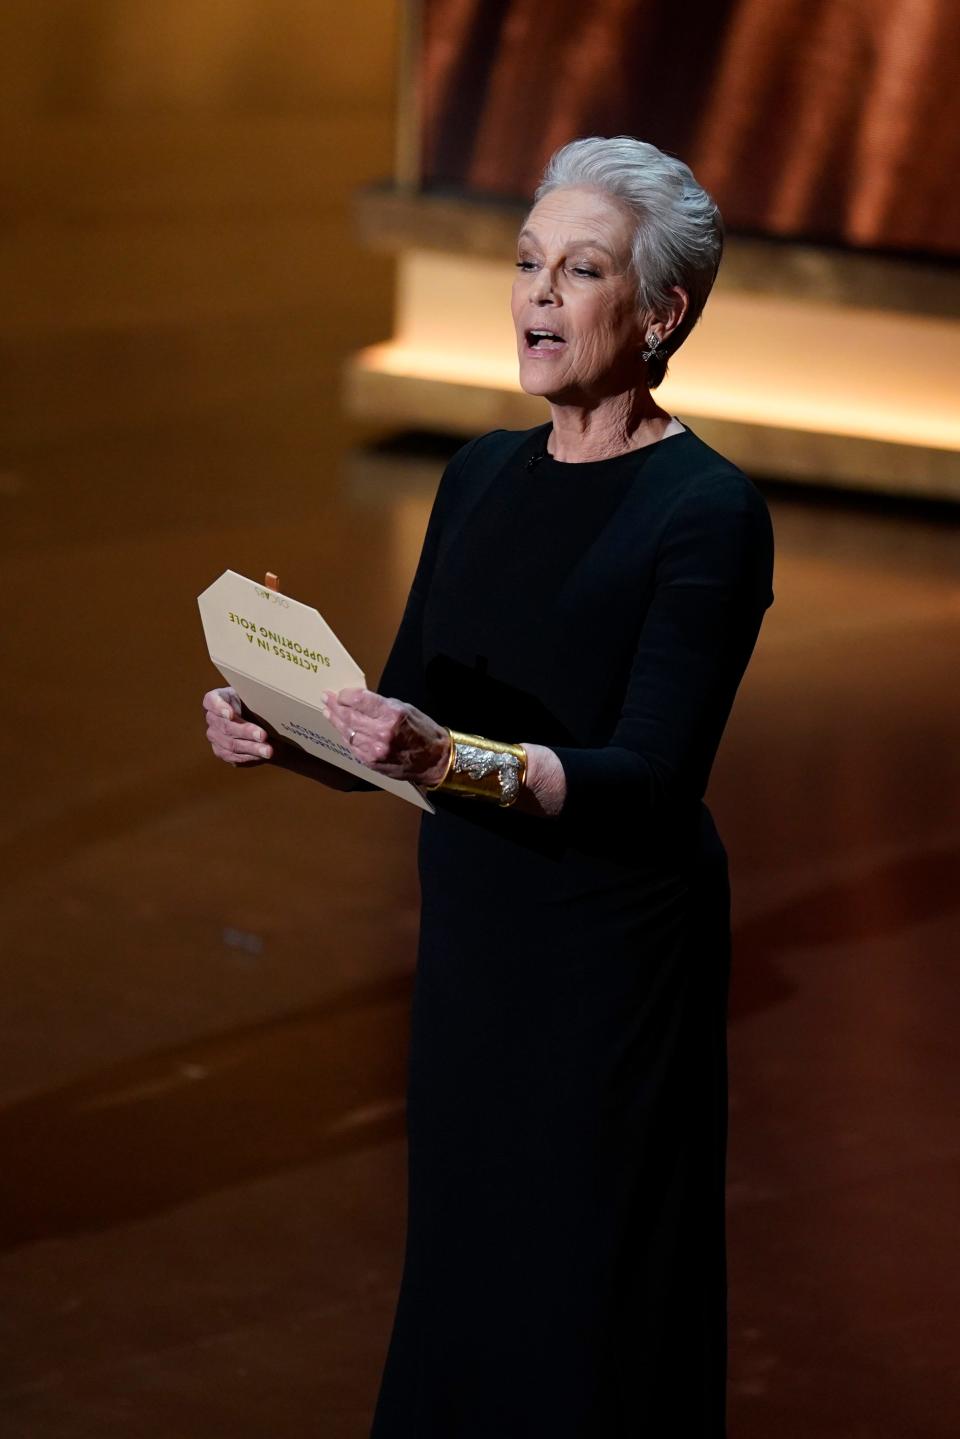 Jamie Lee Curtis was InNOut of the Oscars, left early for a burger